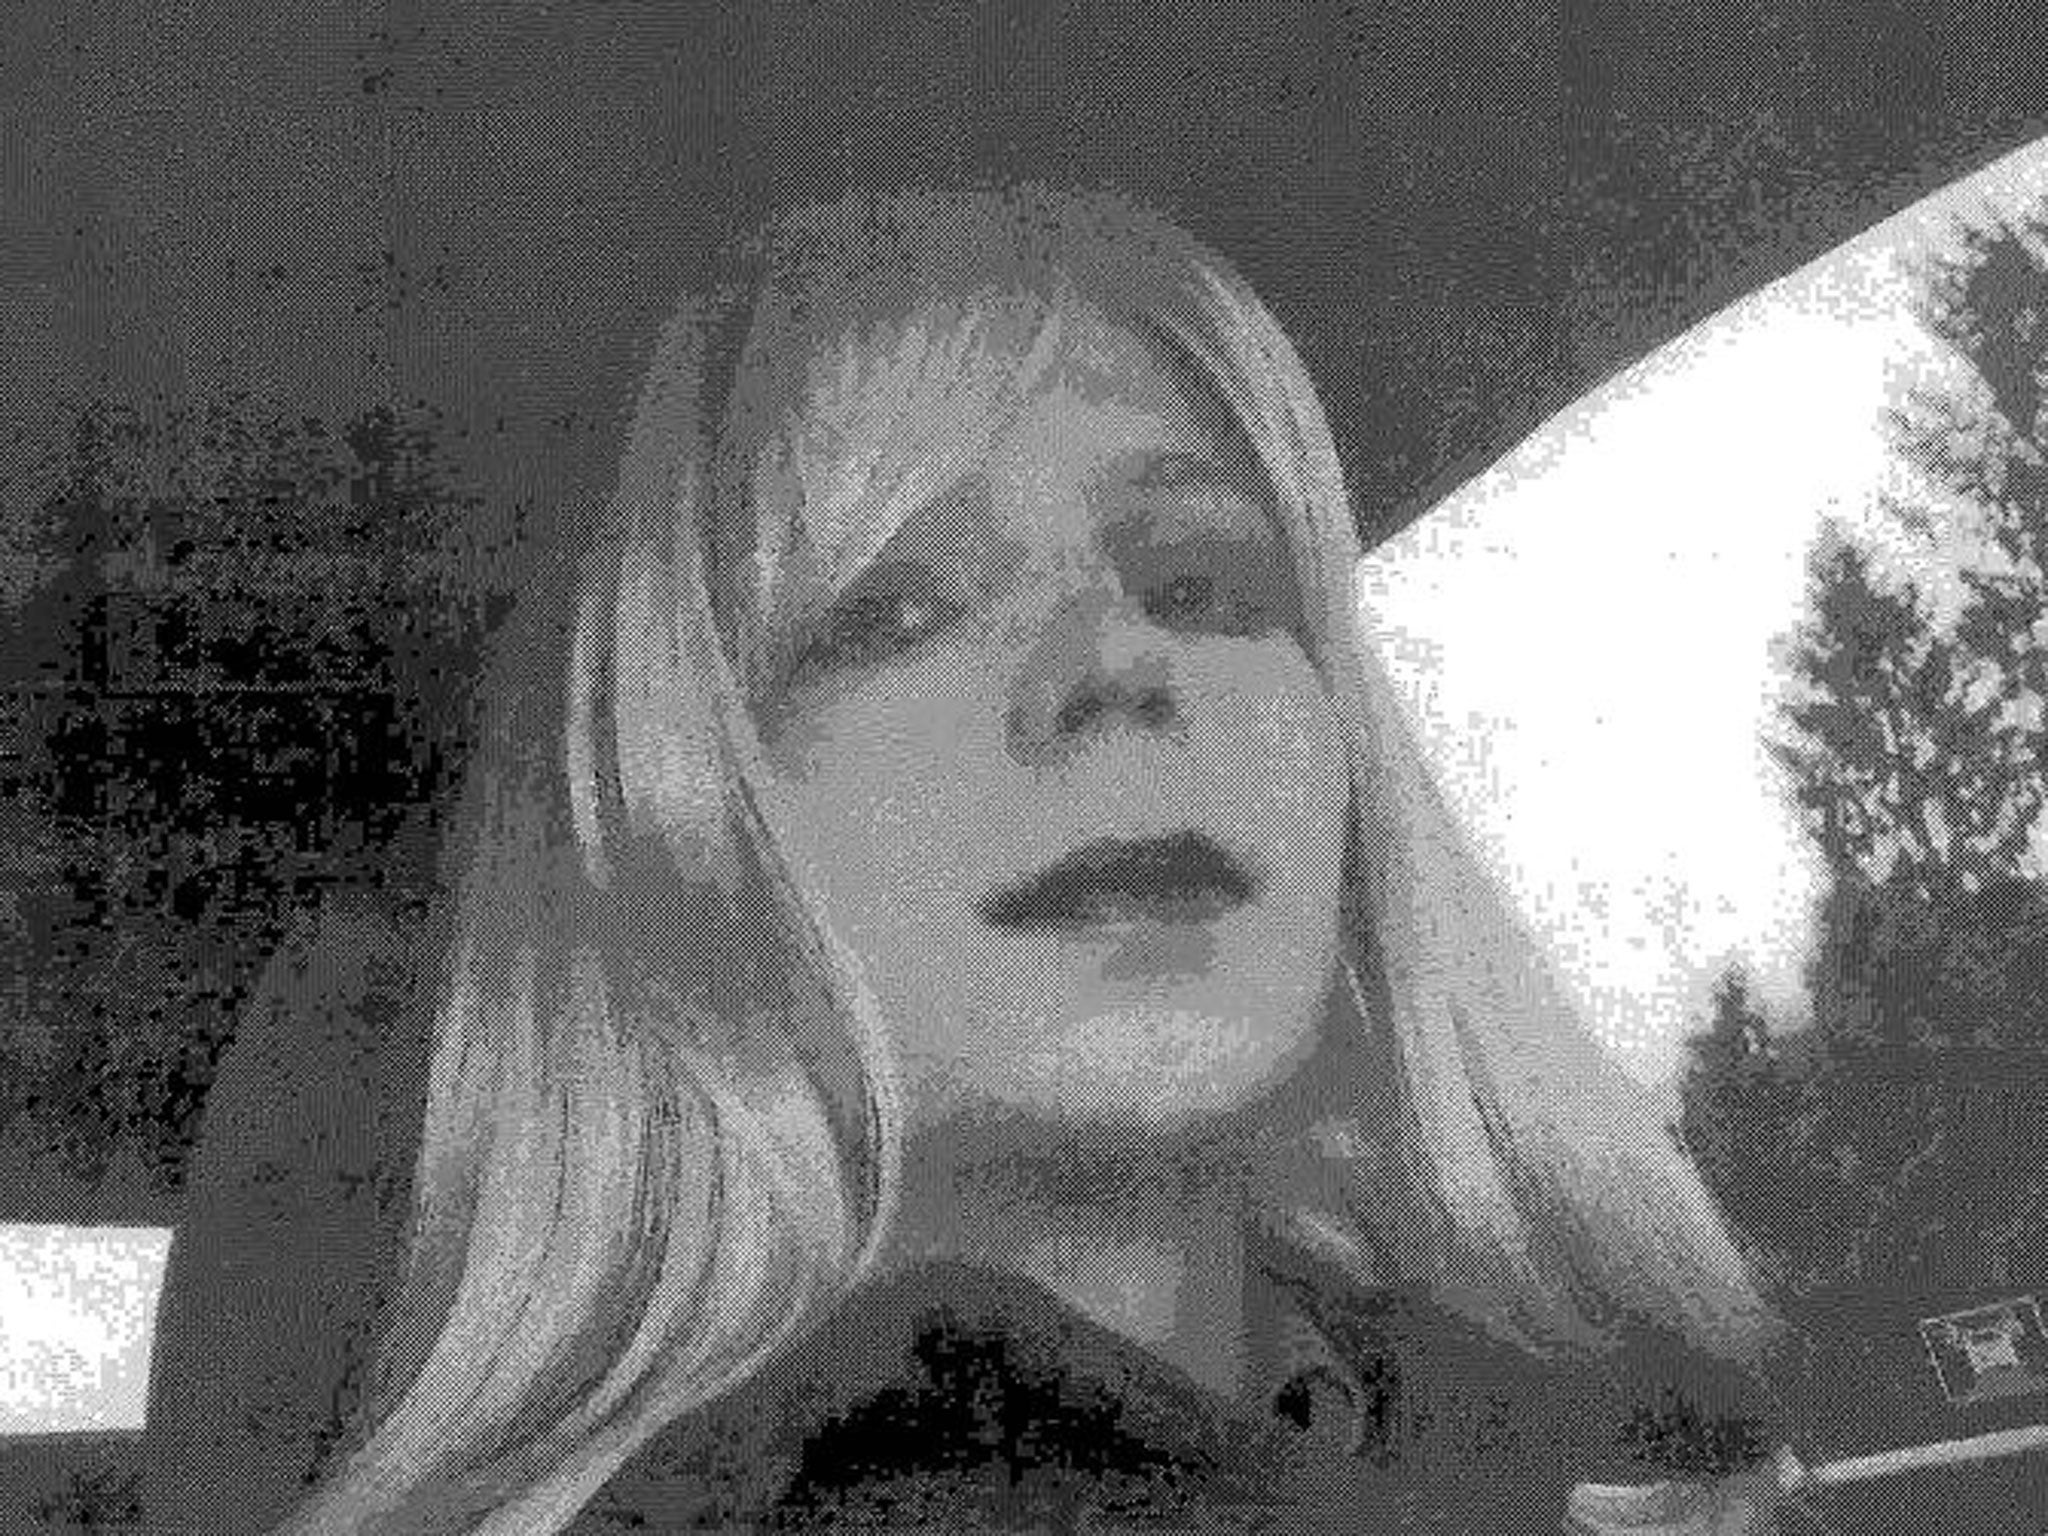 Bradley Manning, shown dressed as a female in a handout from the US army, now wishes to be known as a woman called Chelsea